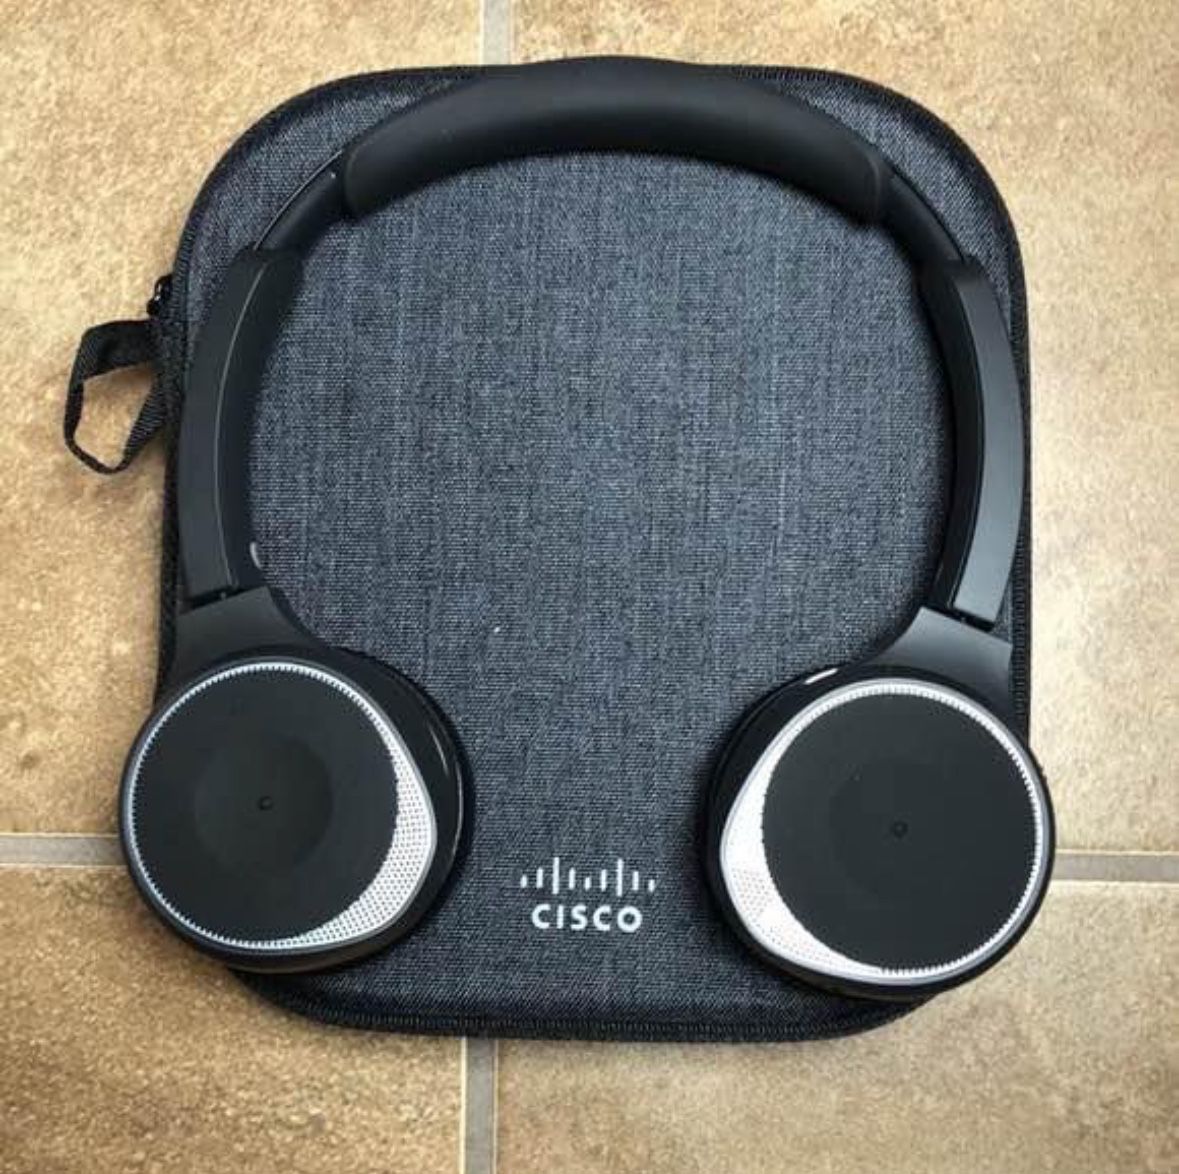 Cisco 730 noise-cancelling headphones, music, conference calls